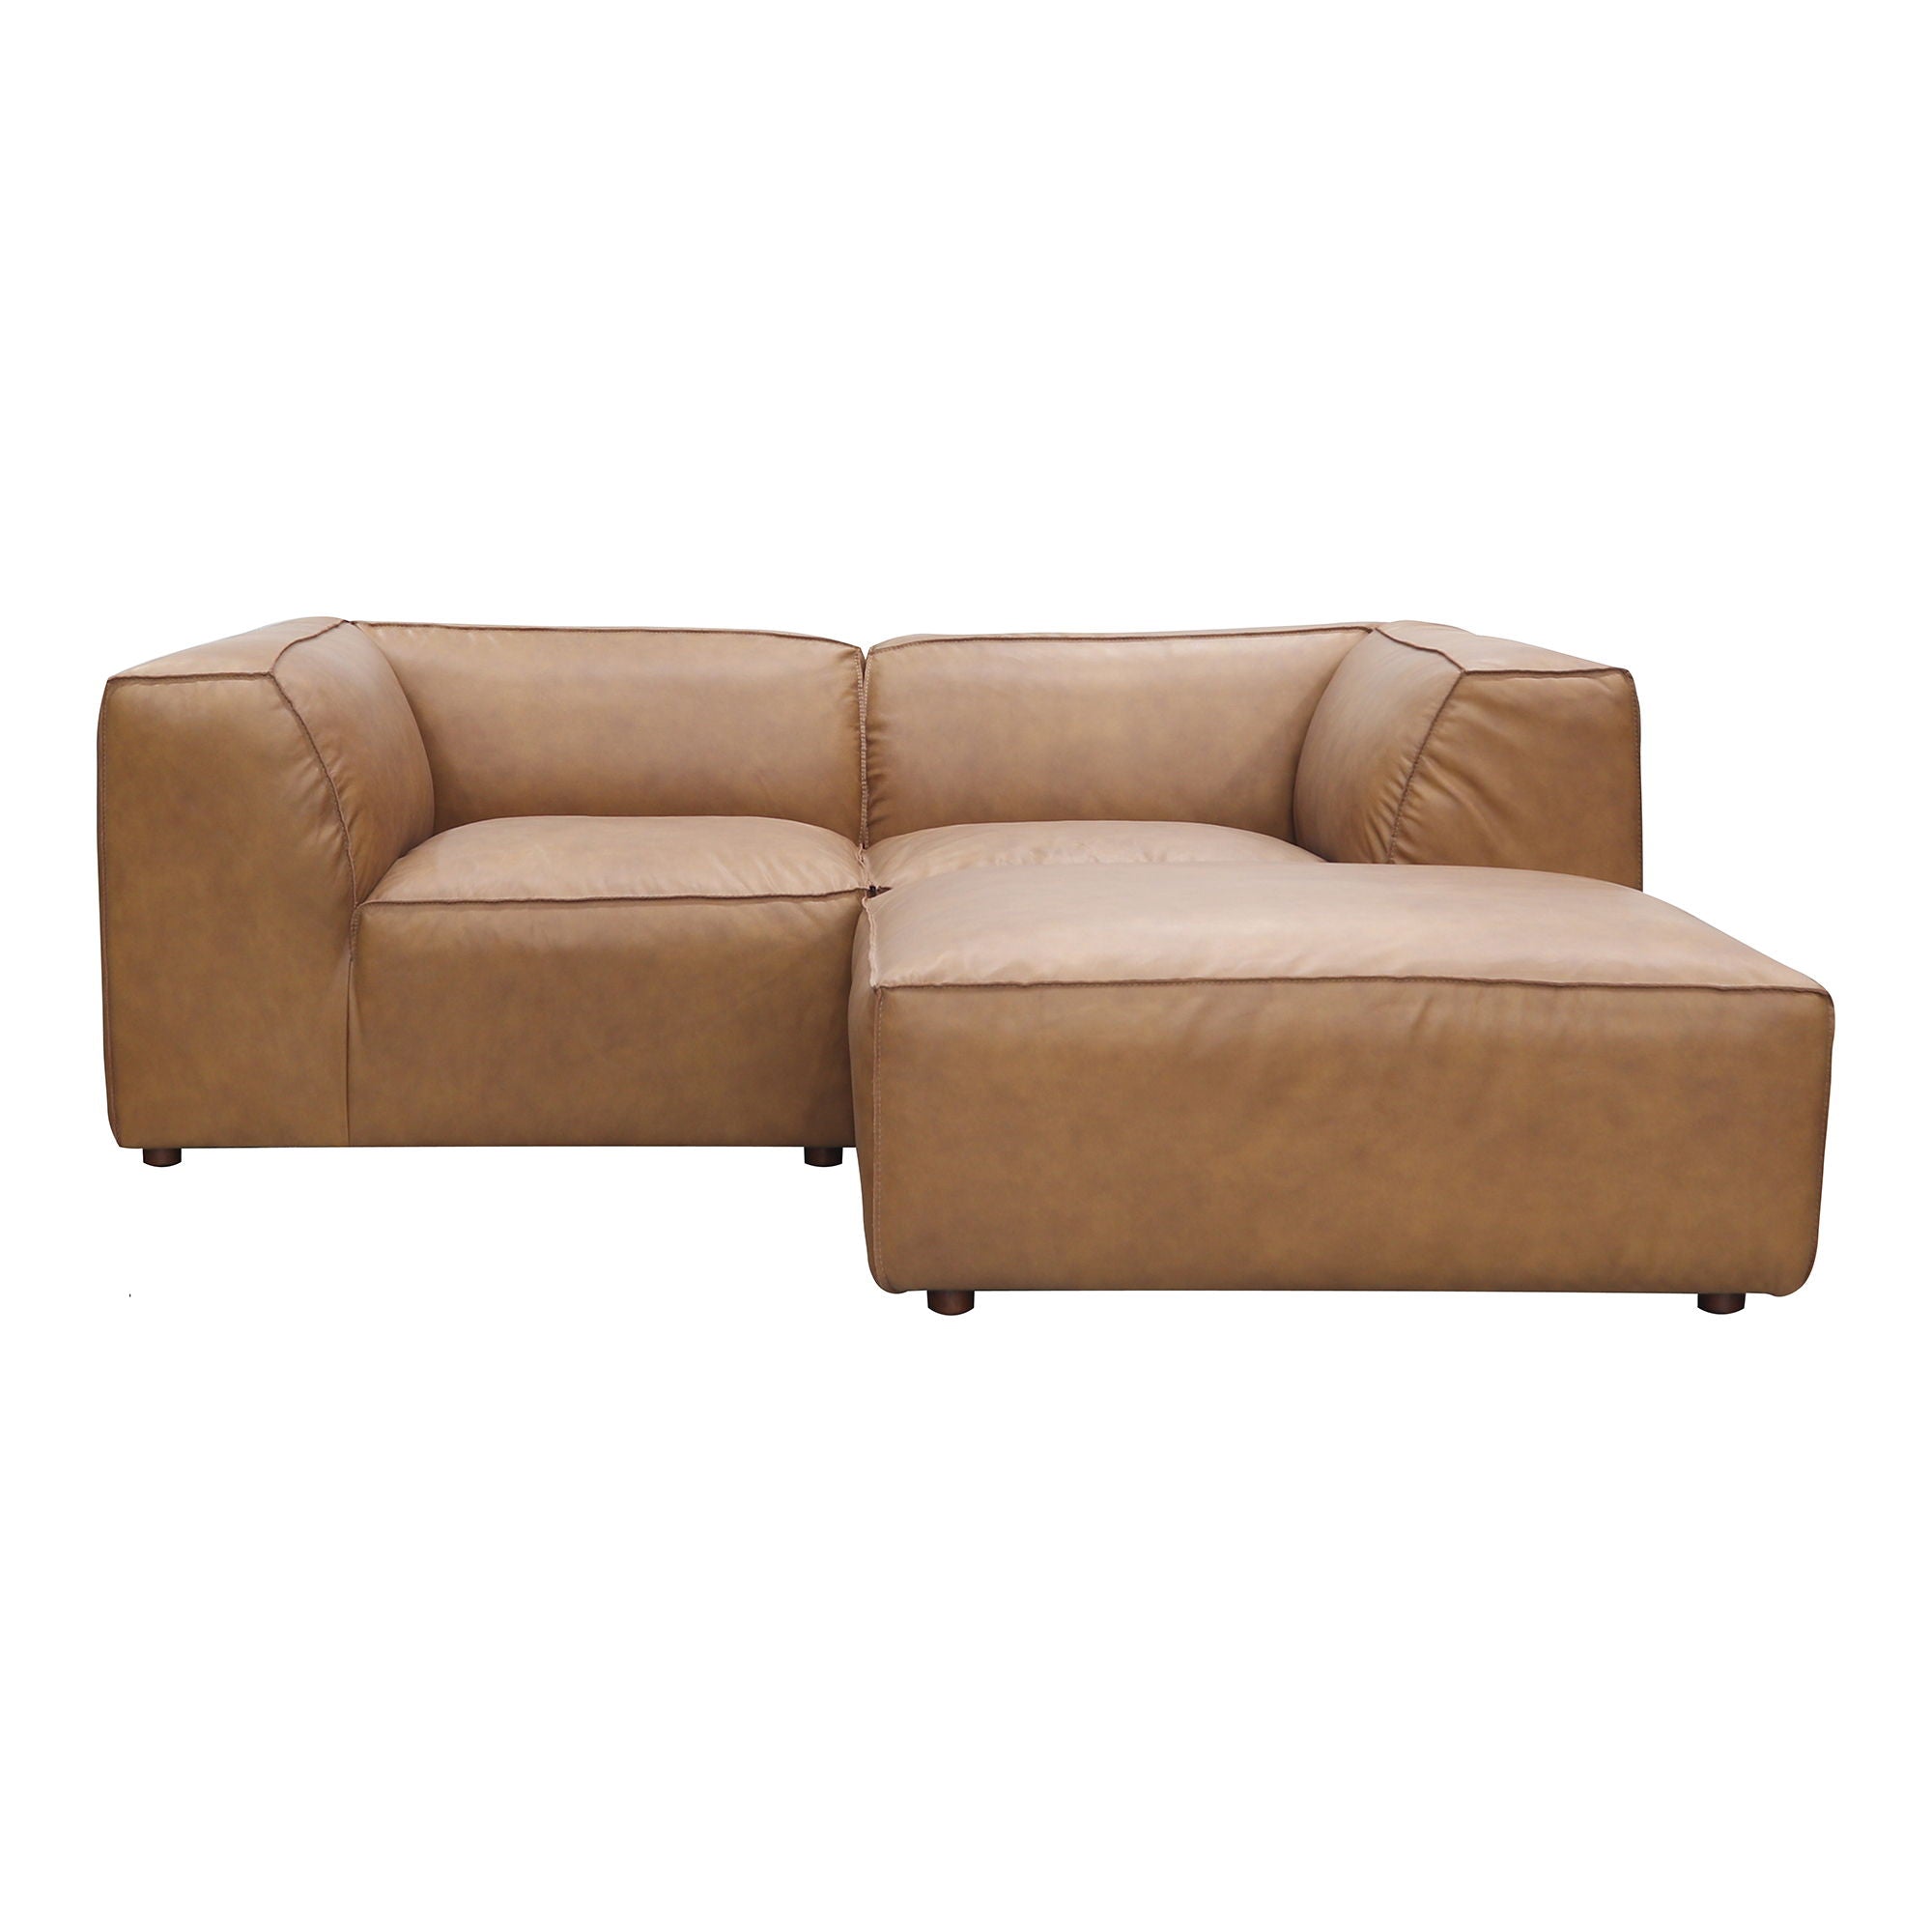 Tan Leather Nook Modular Sectional - 3-Piece, Form